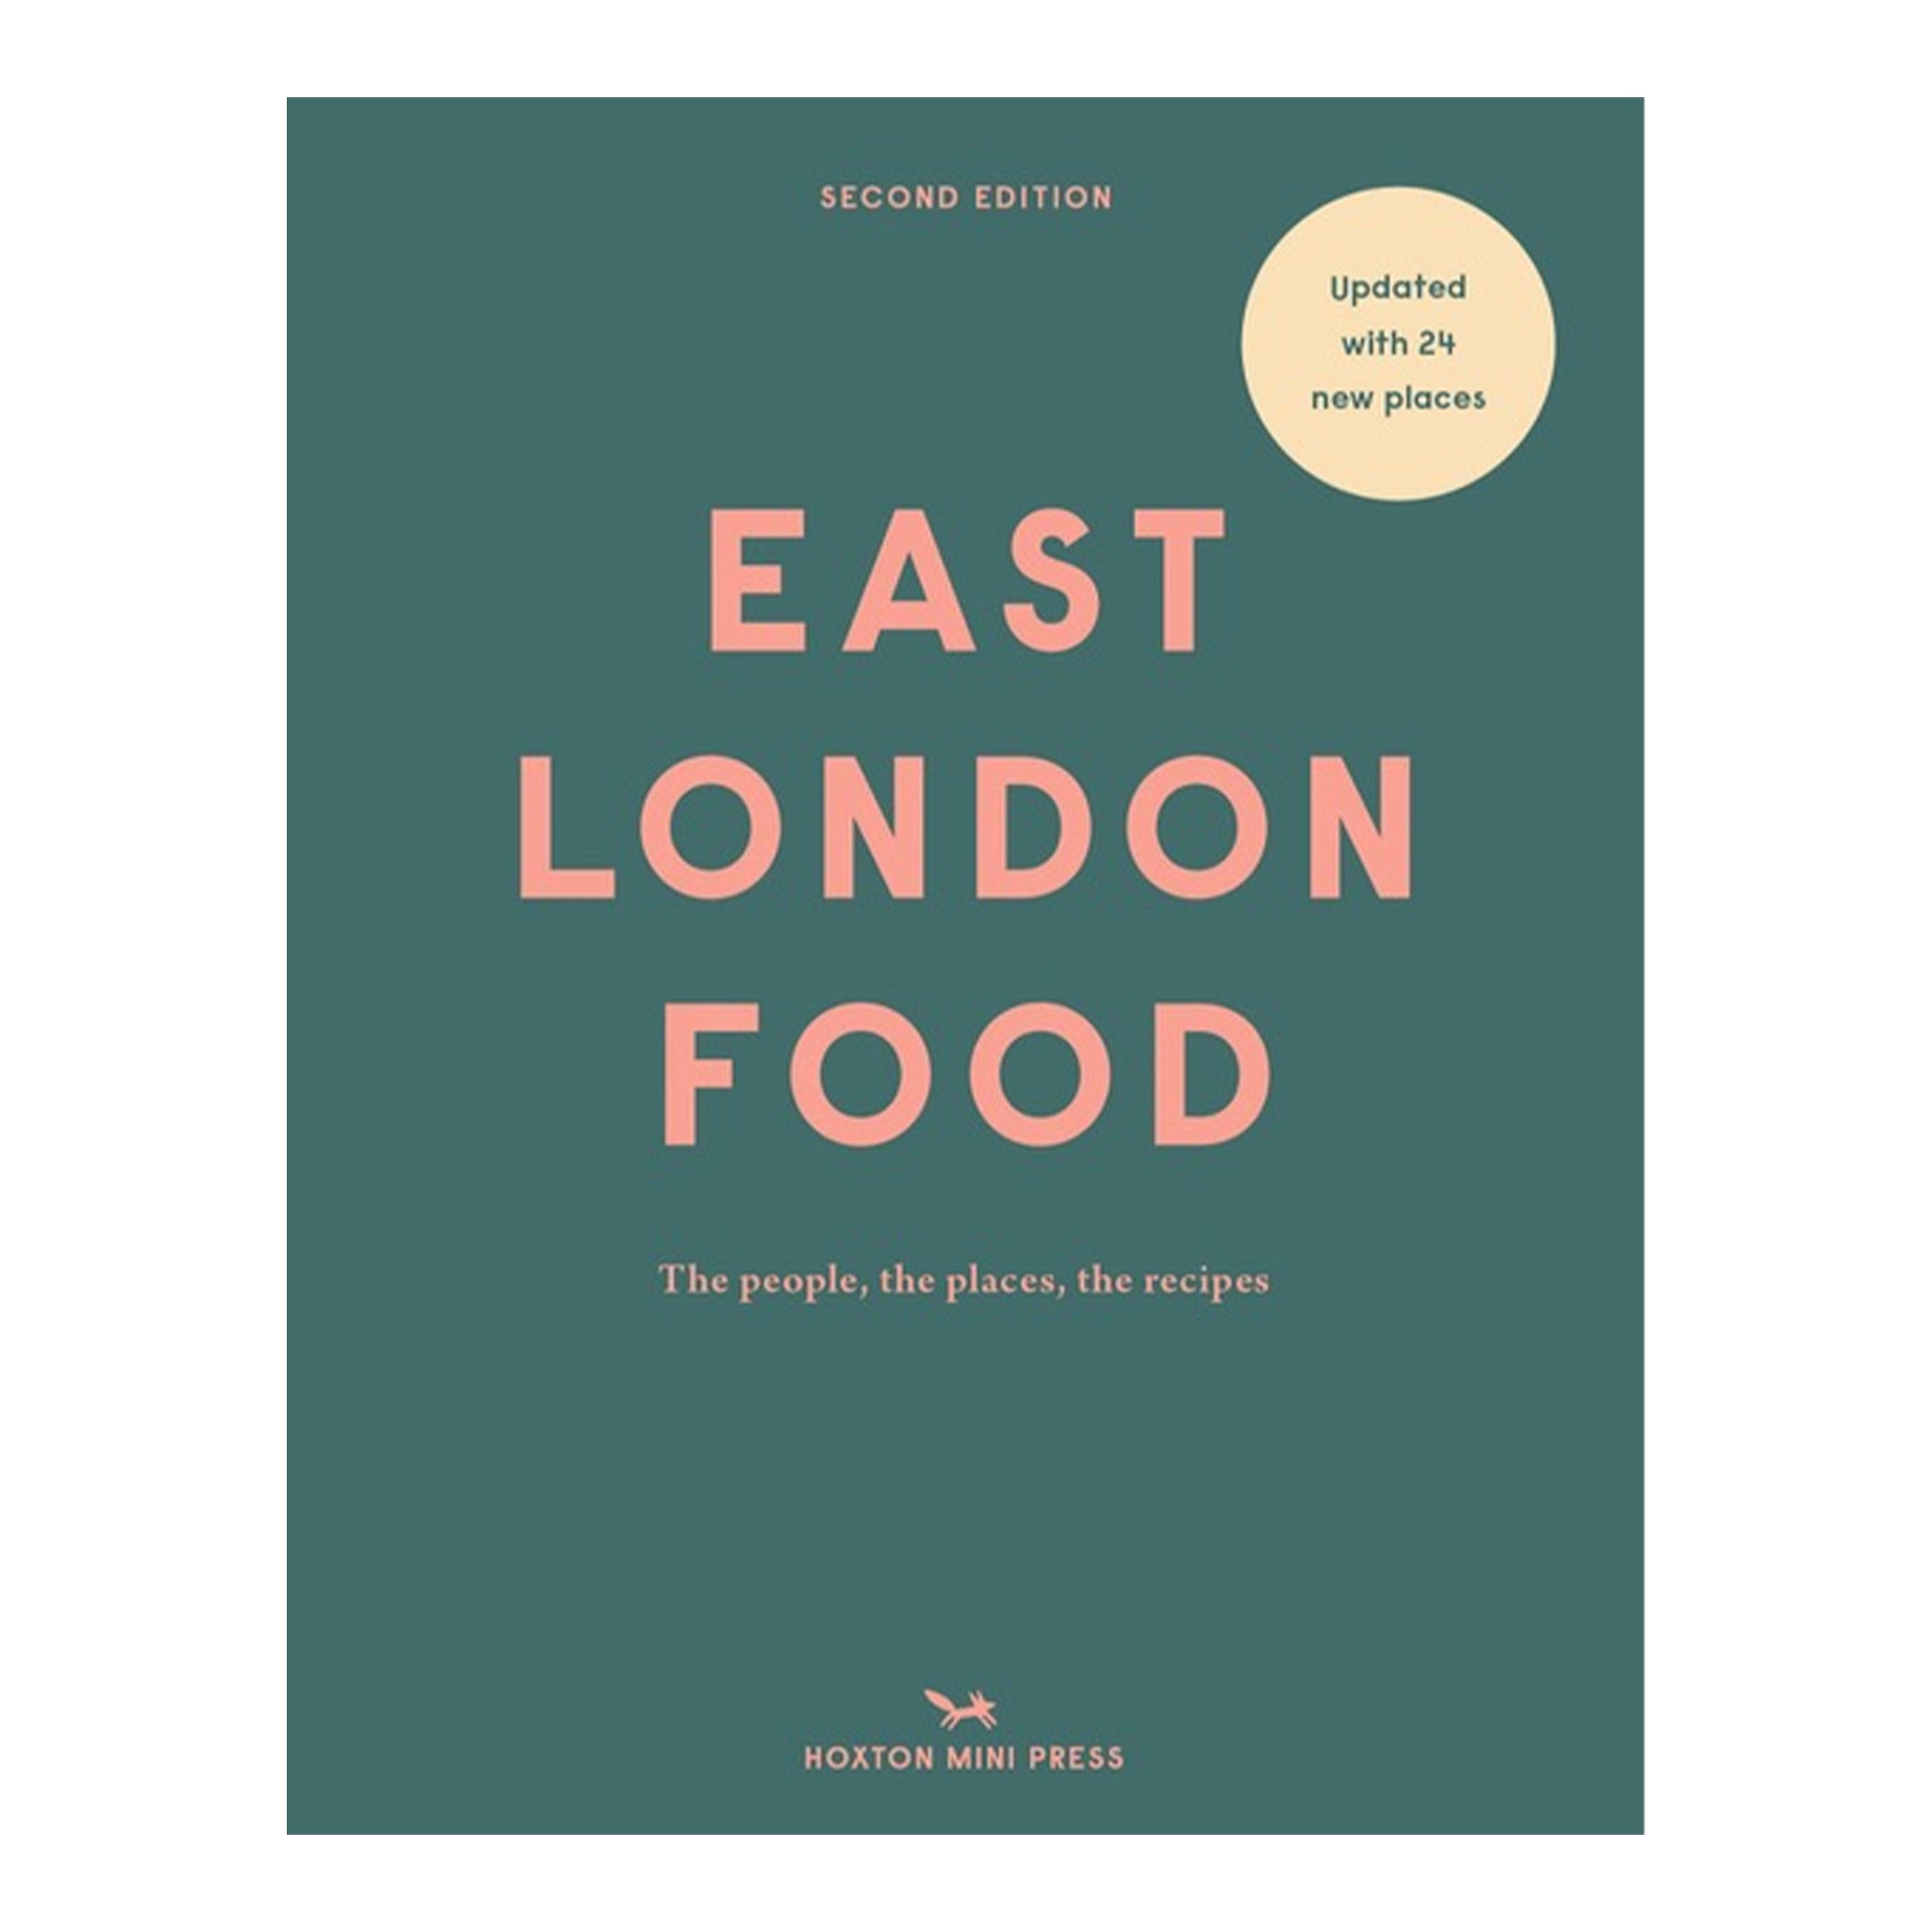 East London Food (Second Edition) by Hoxton Mini Press